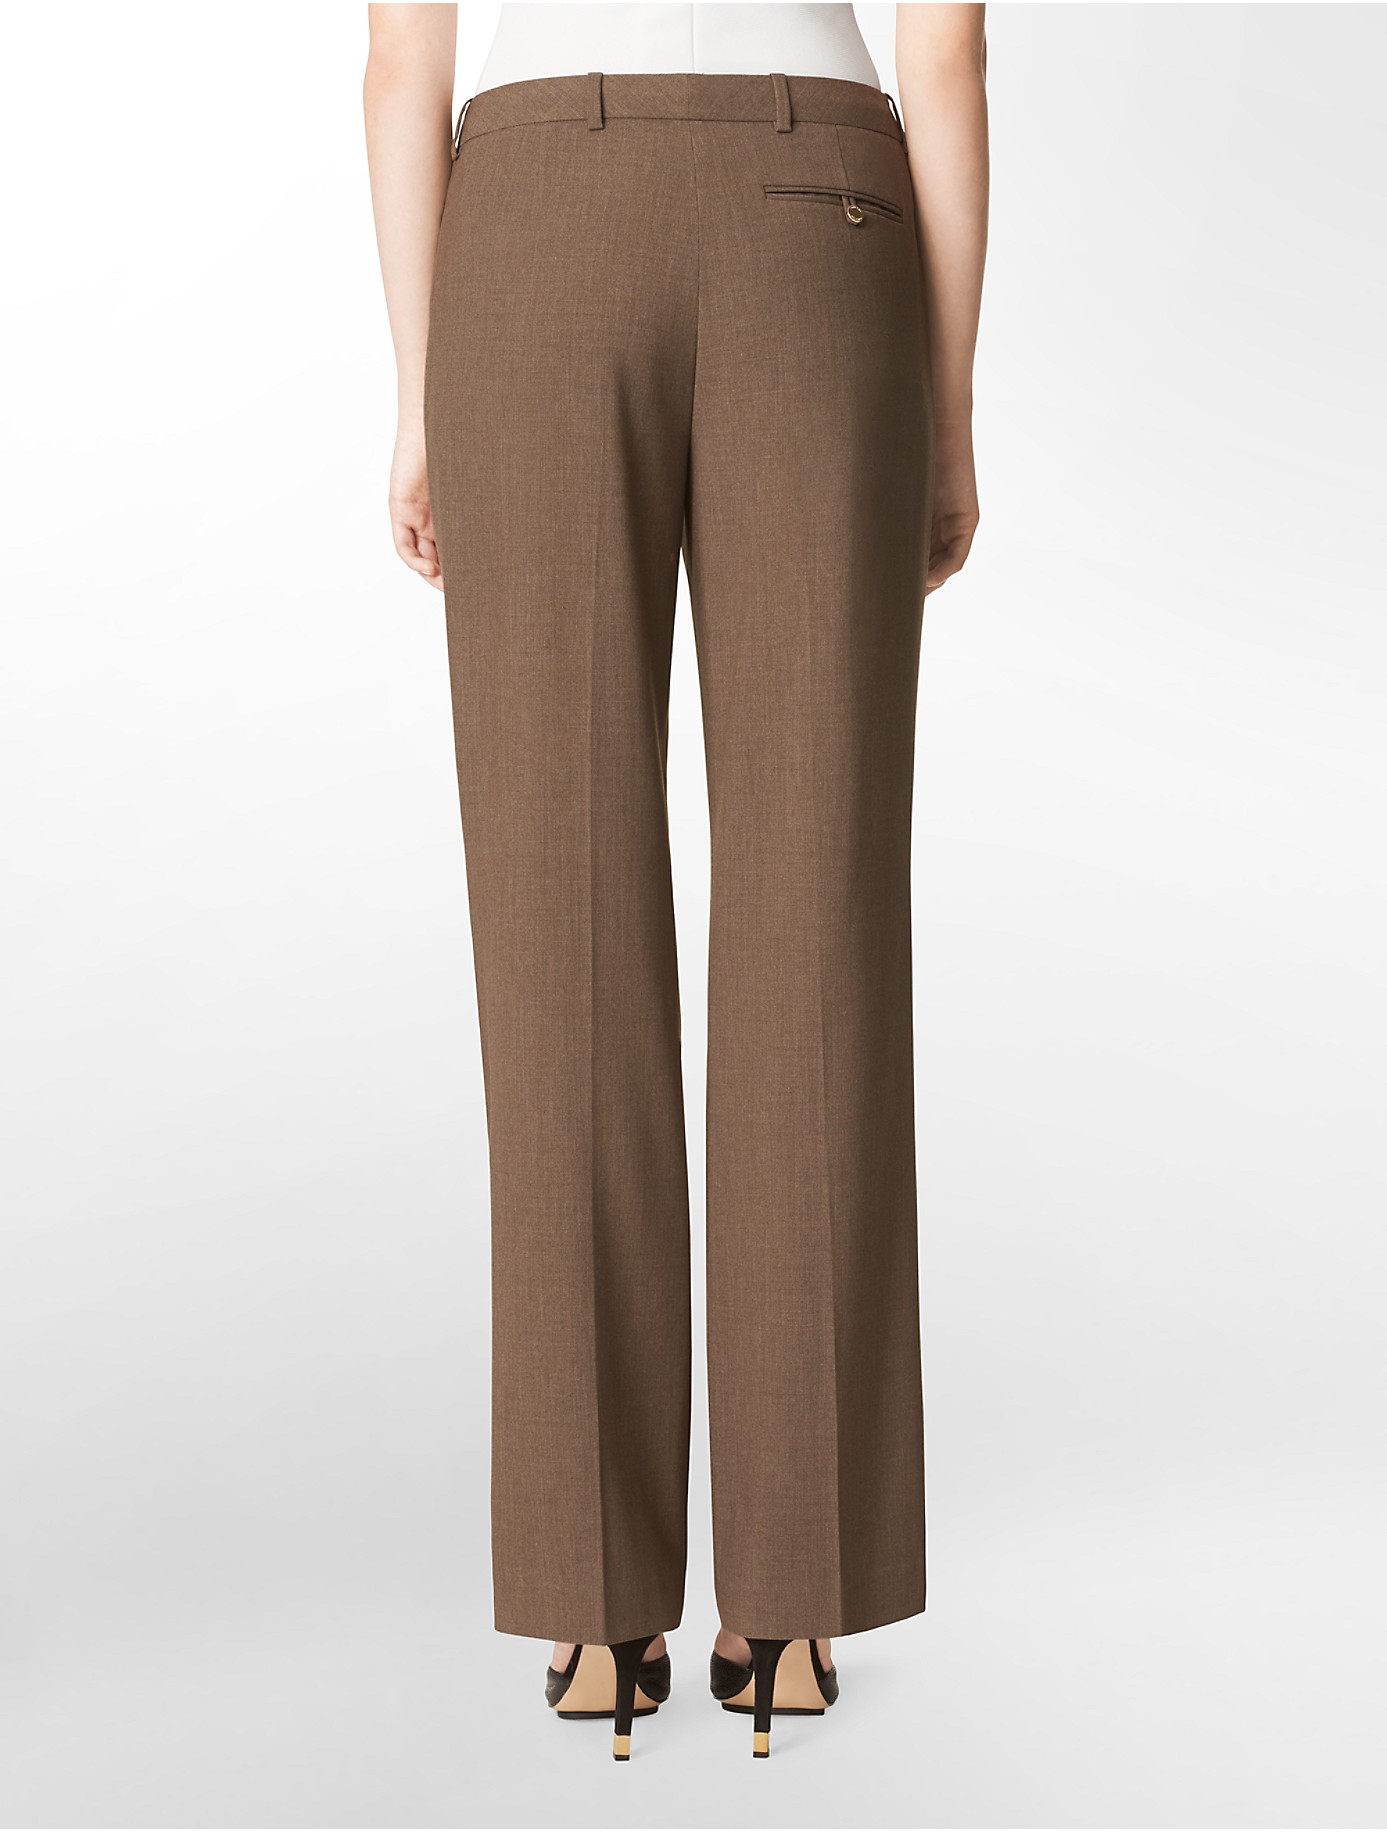 Lyst - Calvin Klein Straight Fit Heather Taupe Suit Pants in Brown